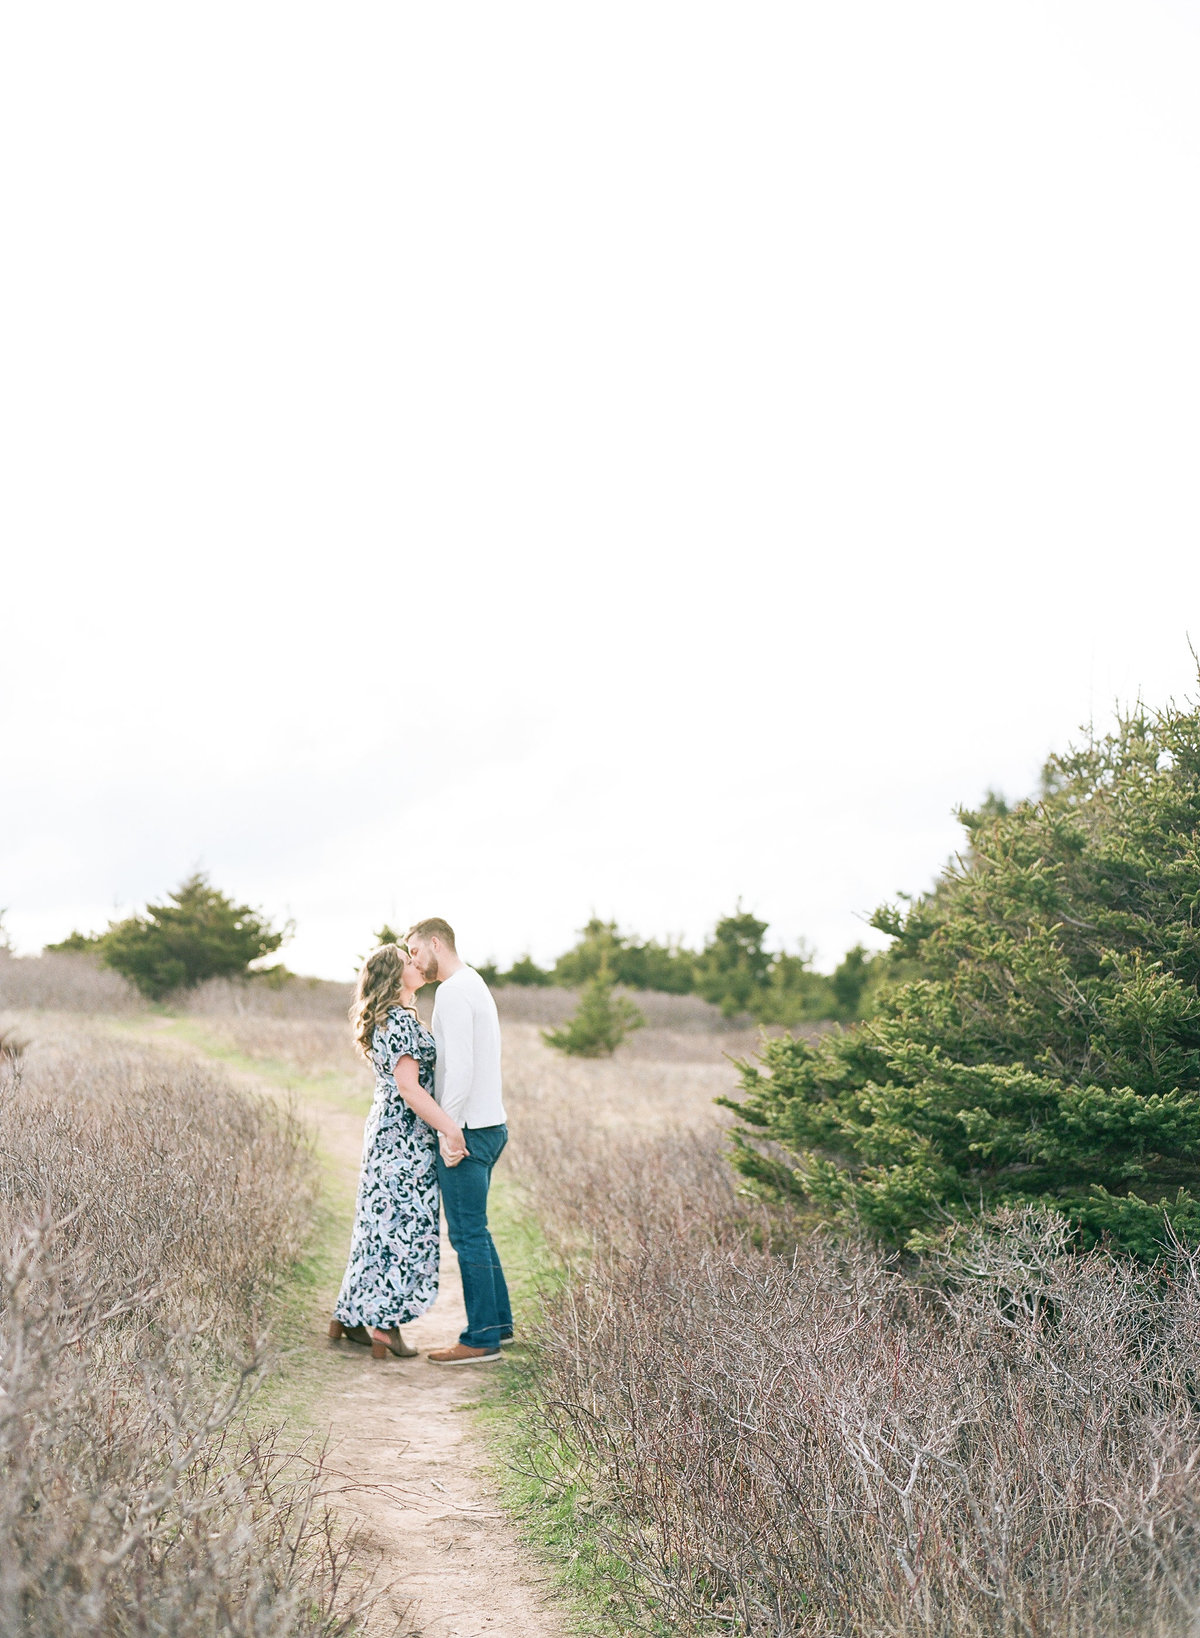 Jacqueline Anne Photography - Akayla and Andrew - Lawrencetown Beach-58